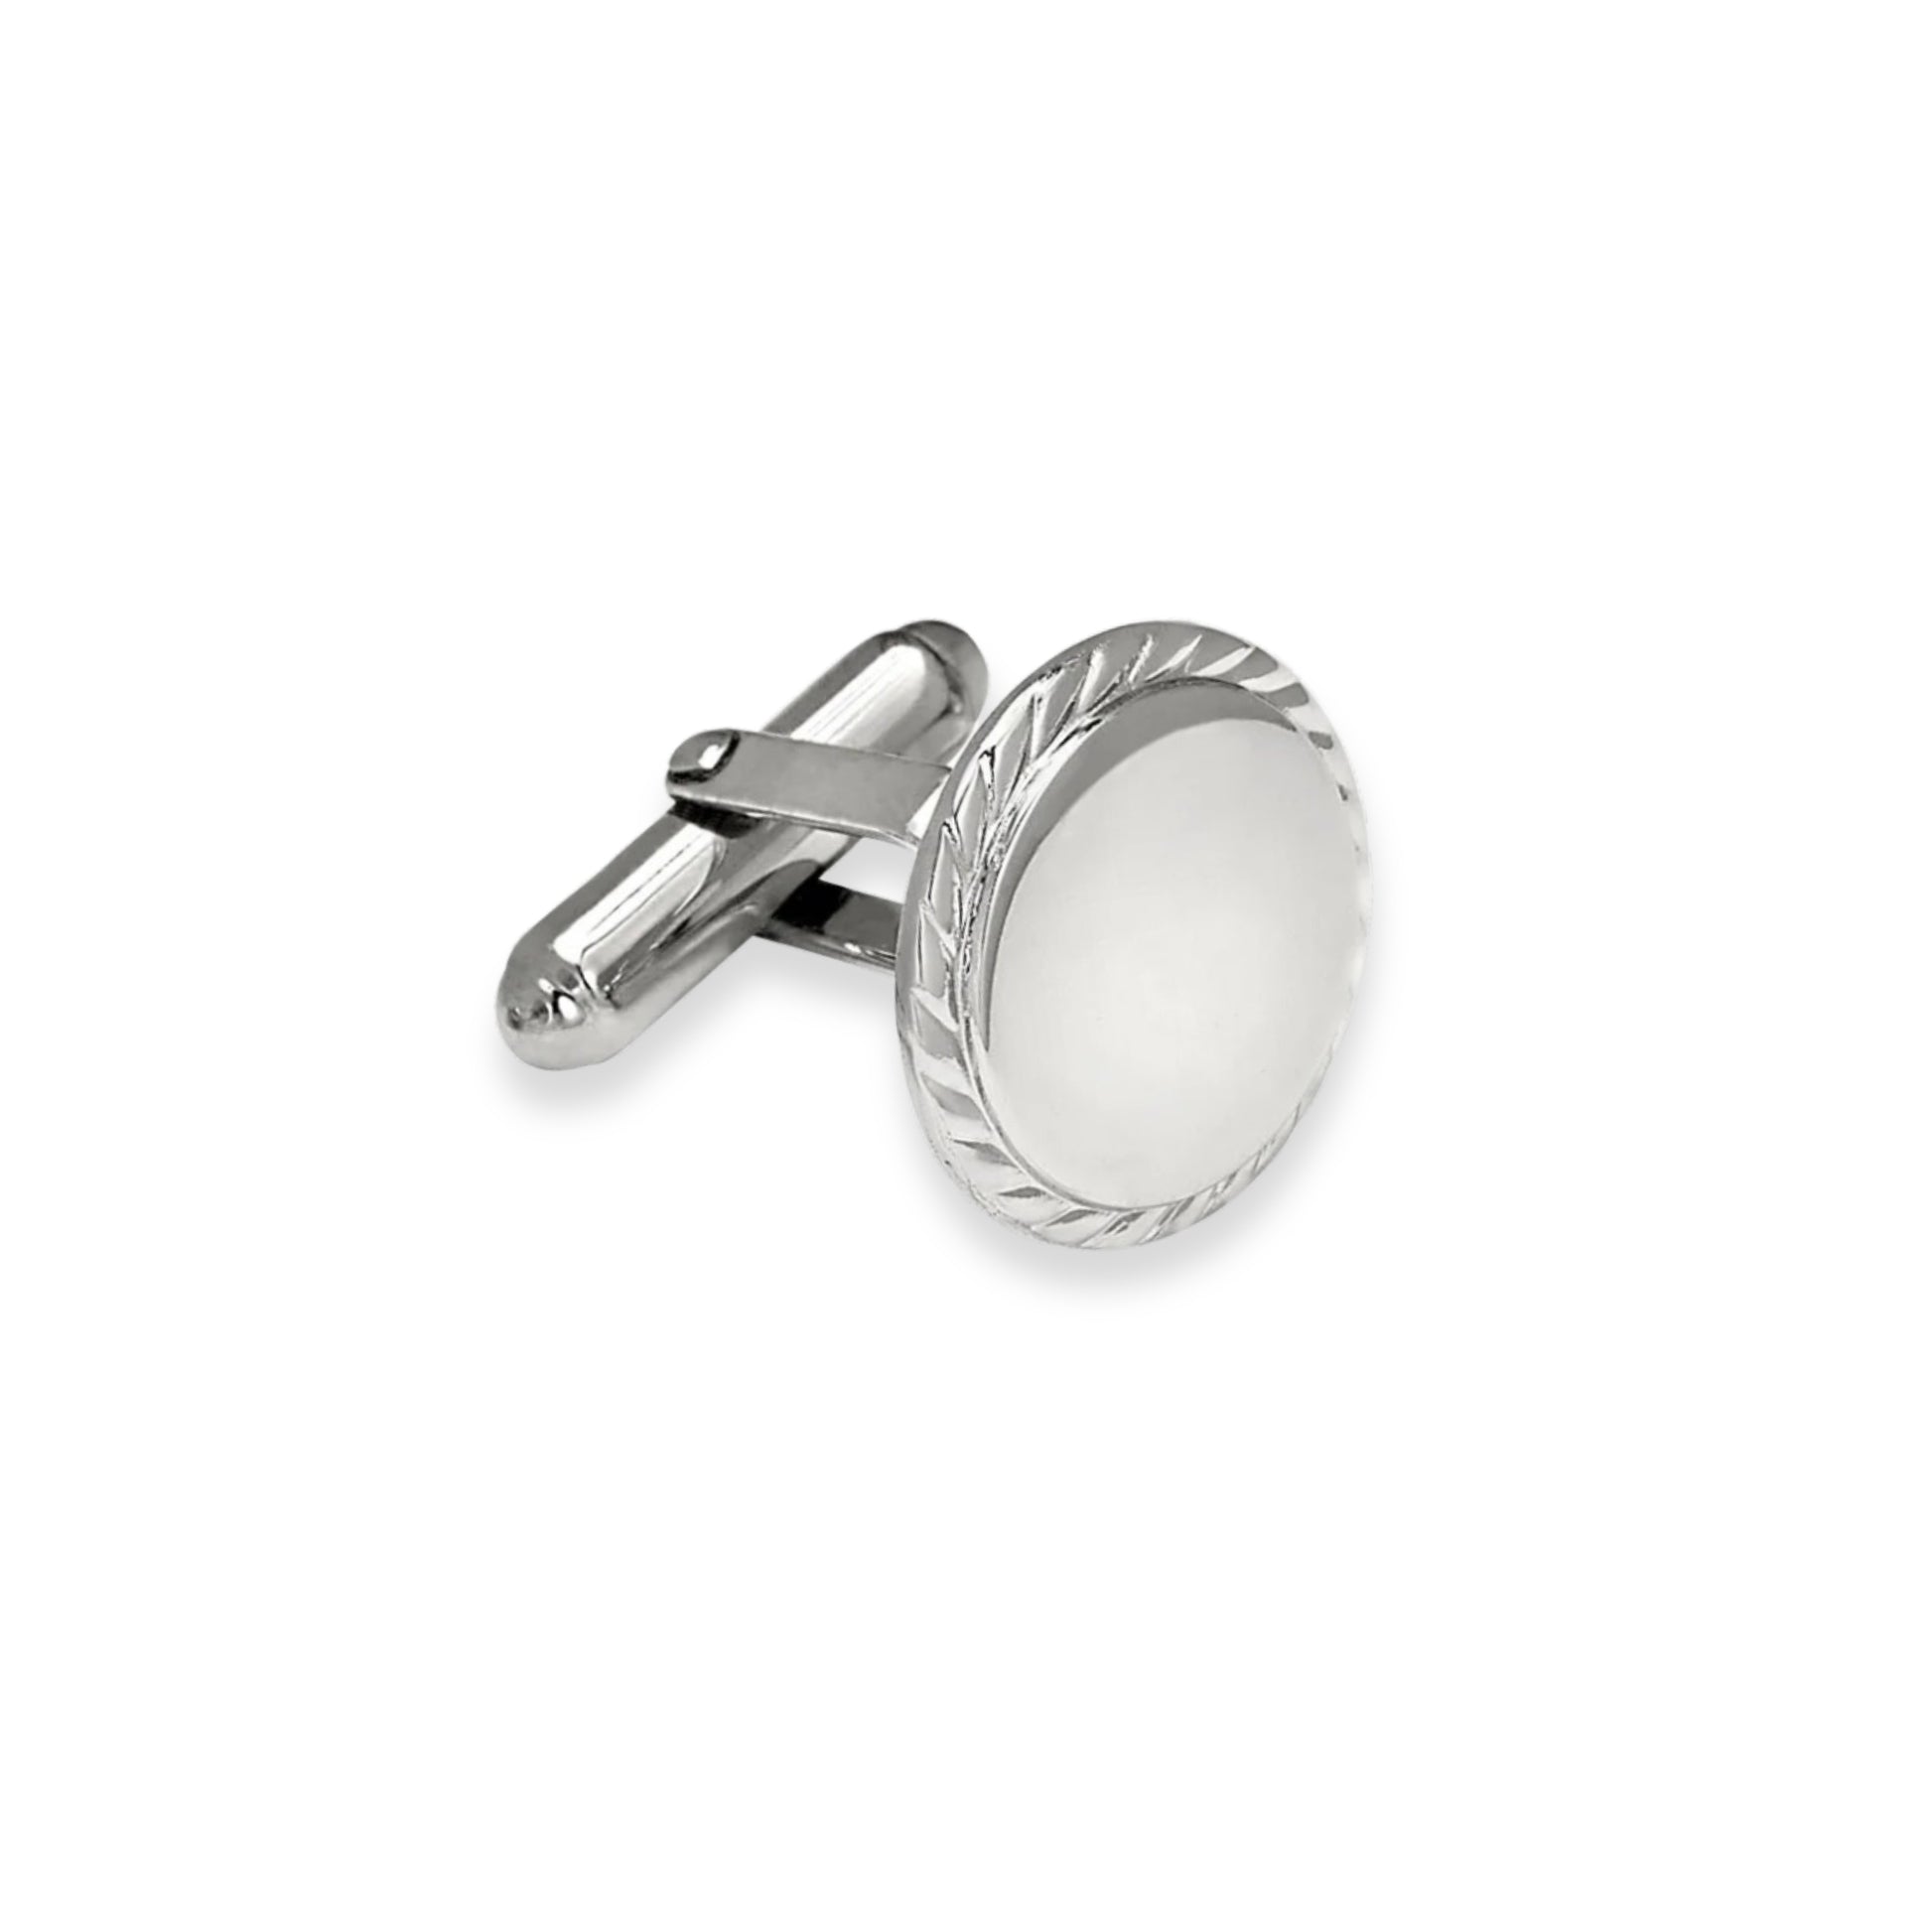 Sterling Silver Round Cufflinks with Rope Edge